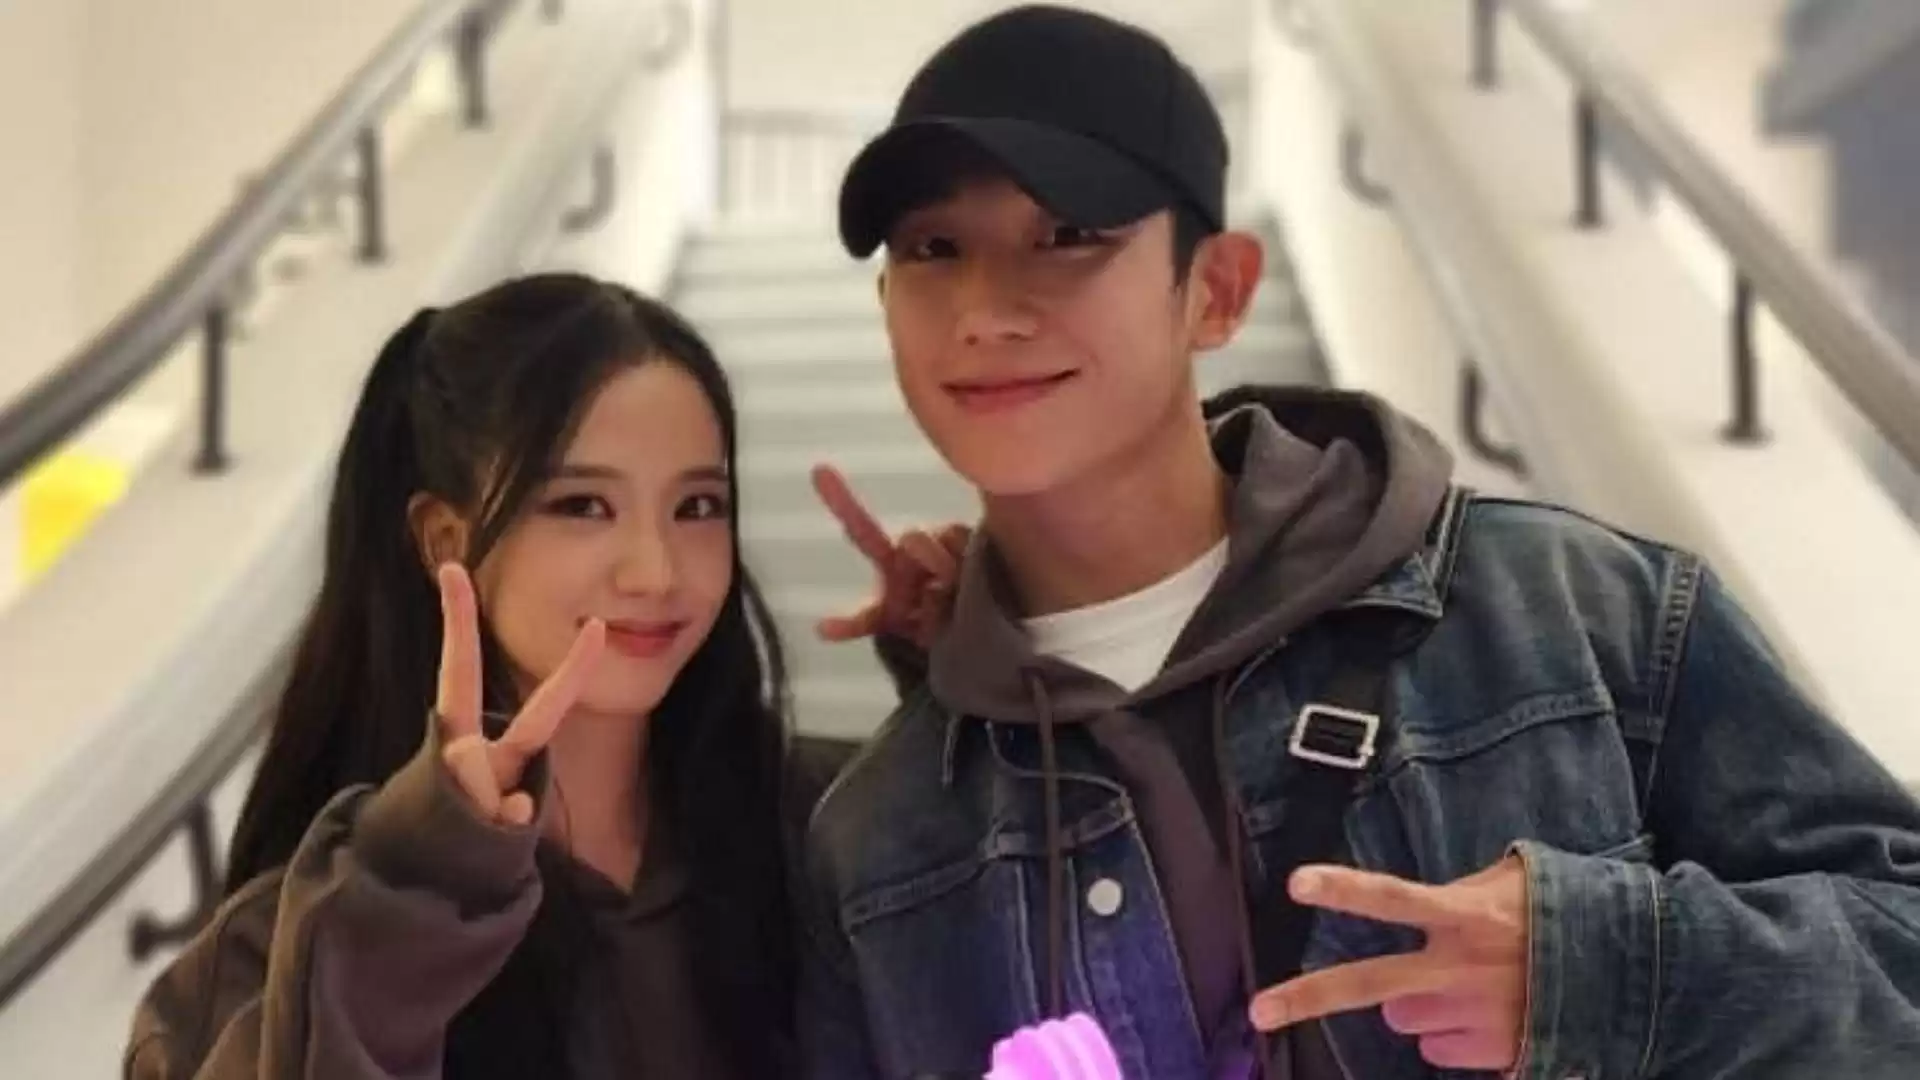 Snowdrop fans trend HAESOO on Twitter after BLACKPINK's Jisoo and Ahn Bo-hyun dating news